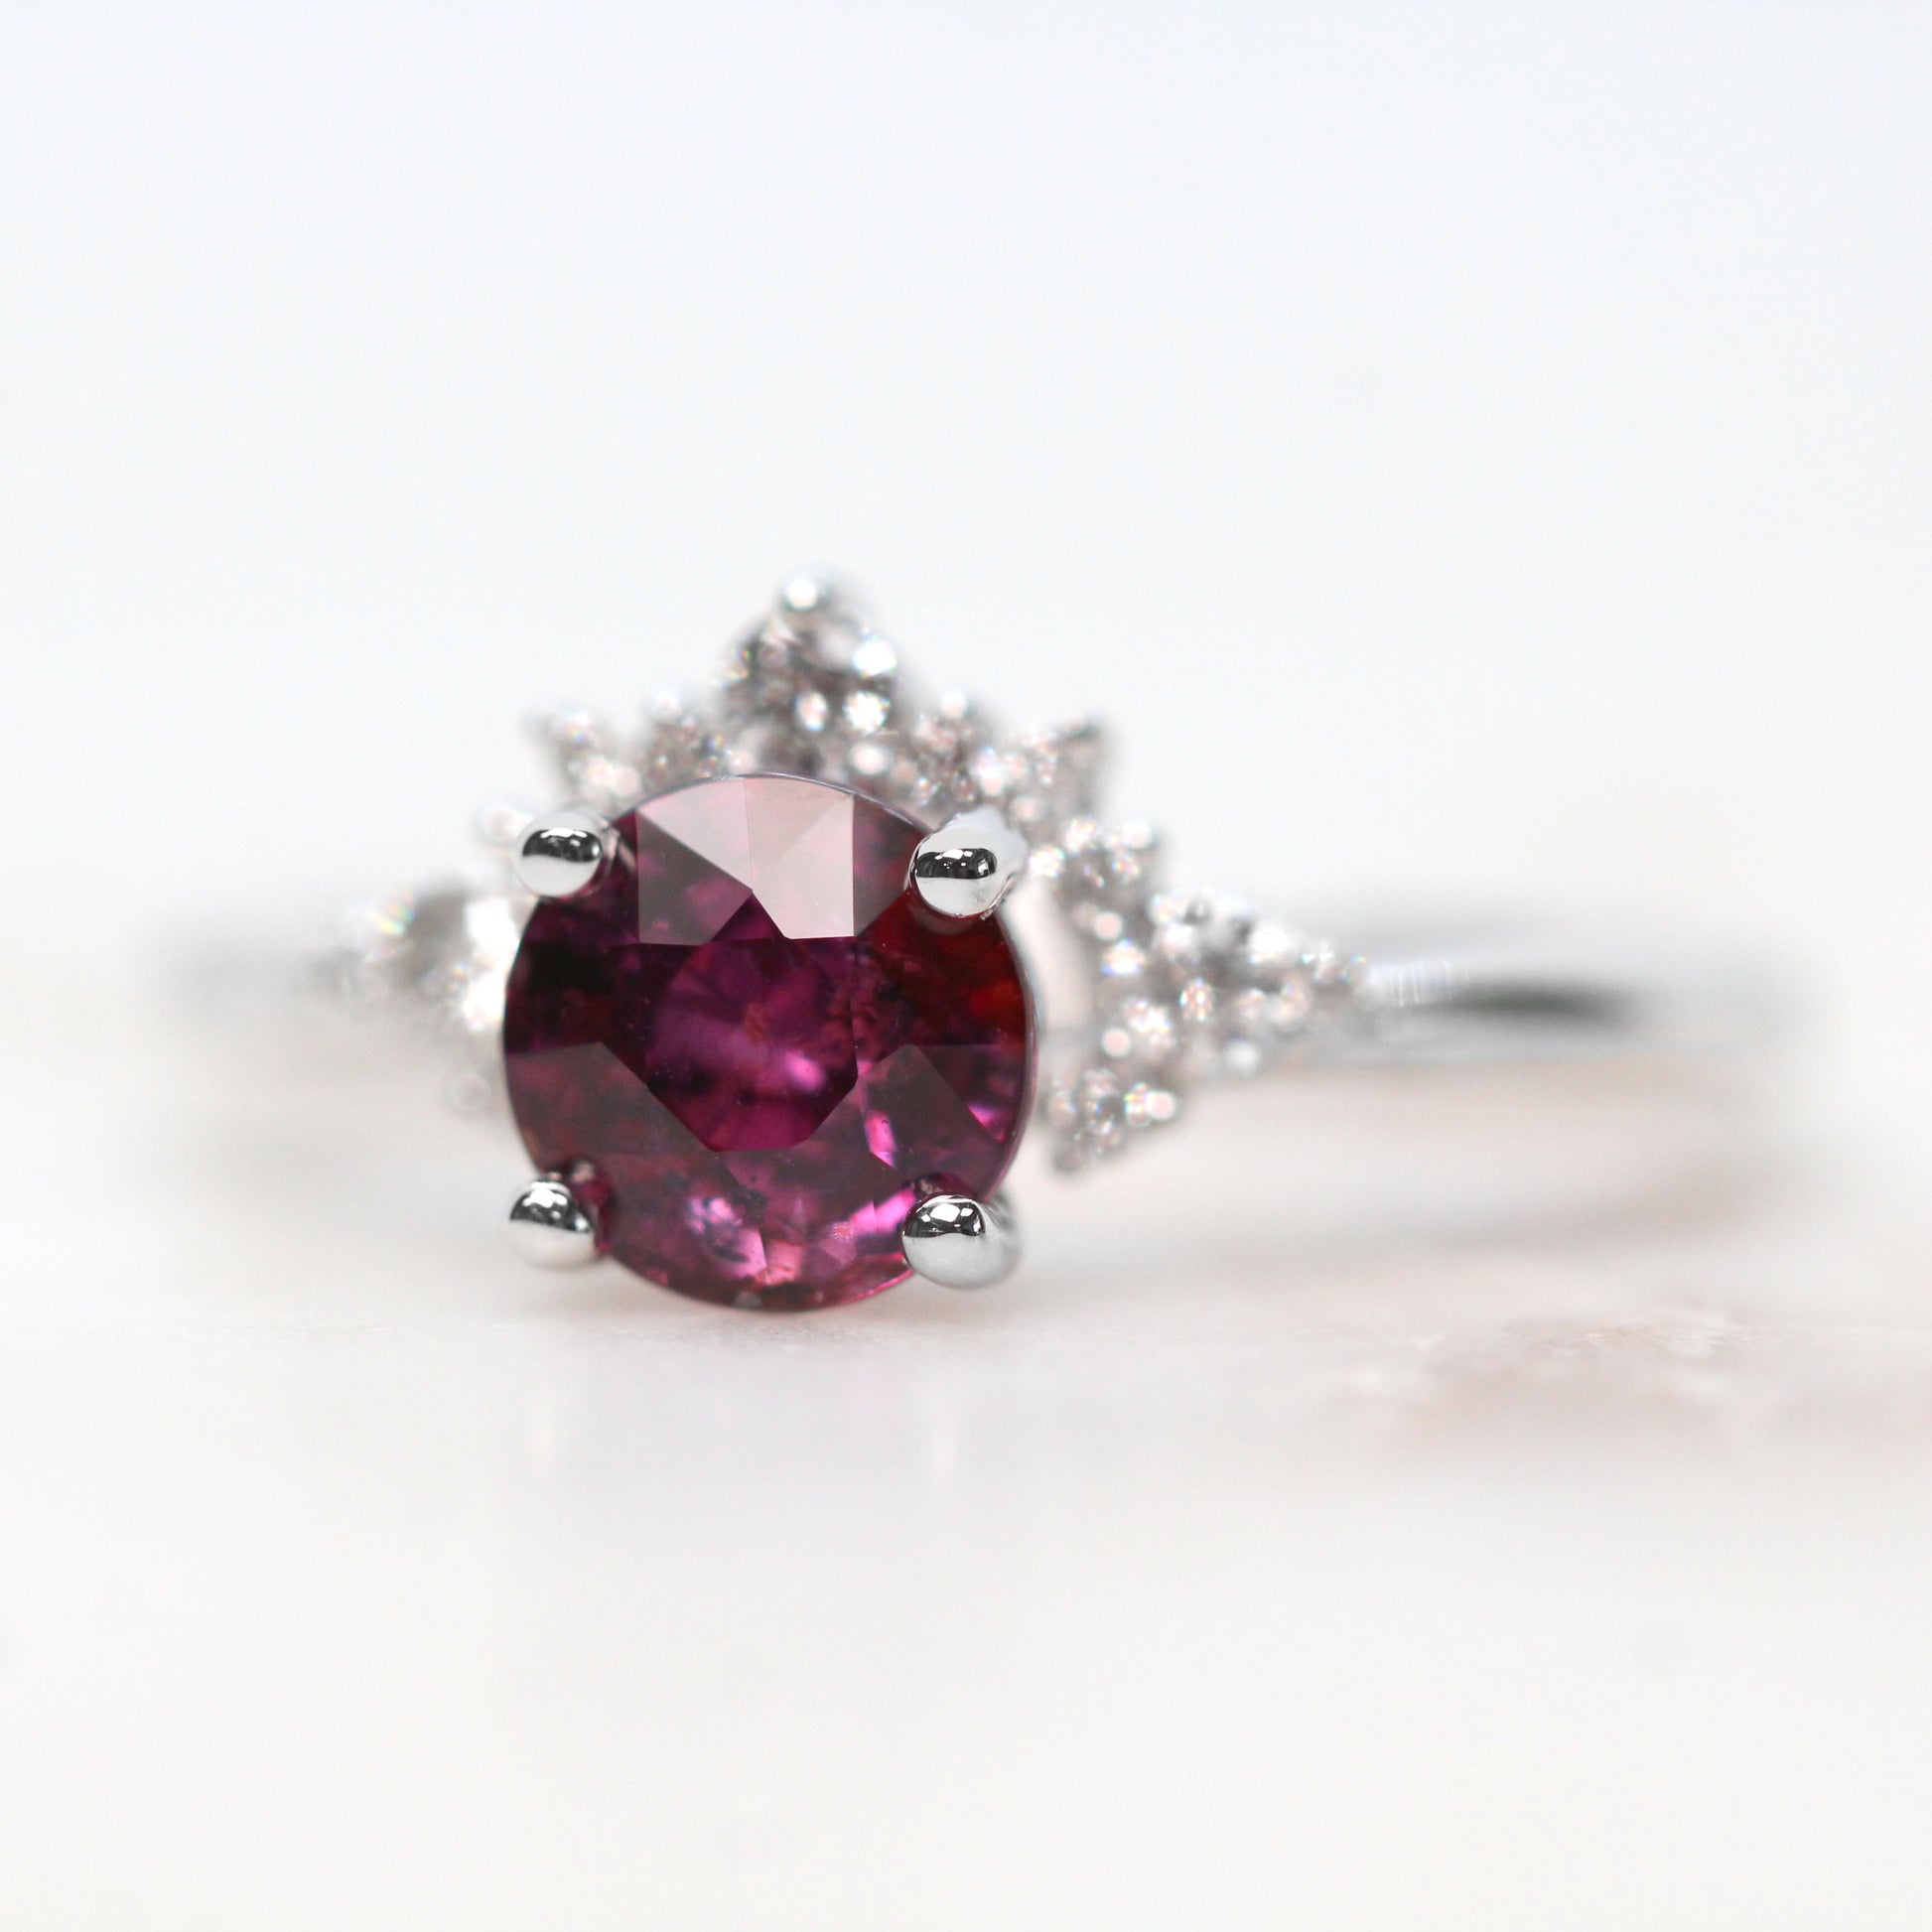 Athena Ring with a 1.72 Carat Round Purple Pink Sapphire and White Accent Diamonds in 14k White Gold - Ready to Size and Ship - Midwinter Co. Alternative Bridal Rings and Modern Fine Jewelry